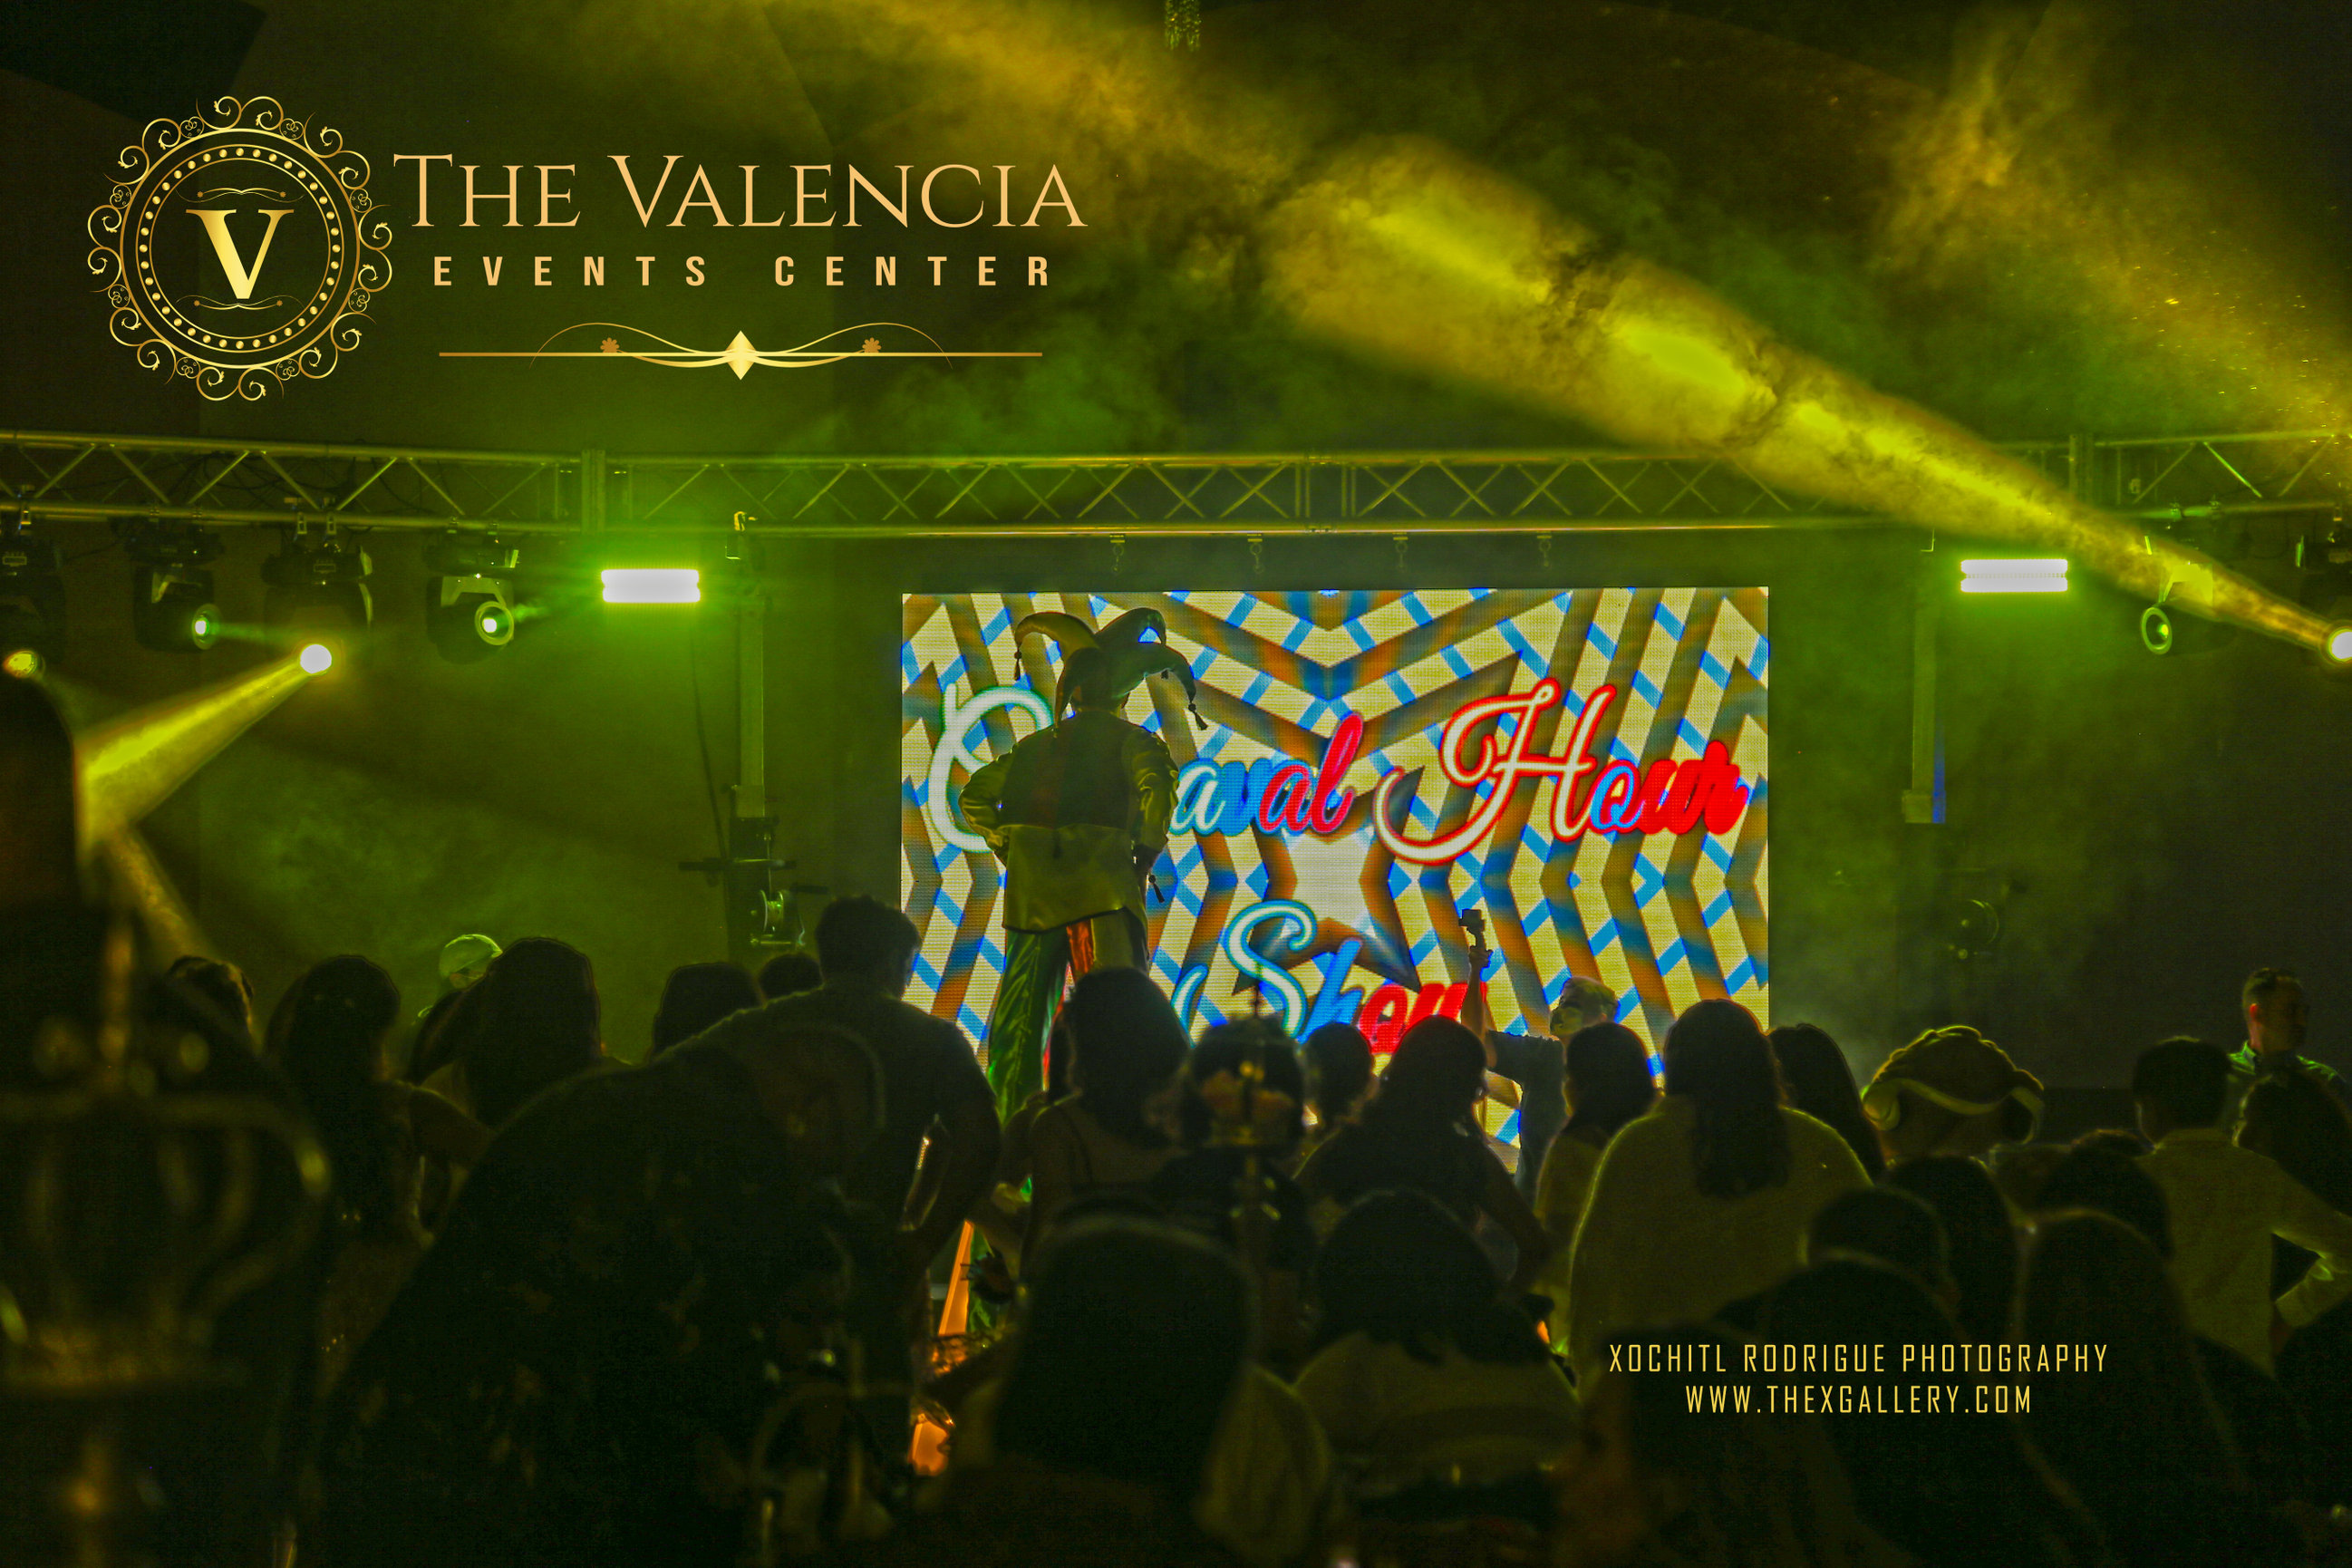 Gallery The Valencia Events Center